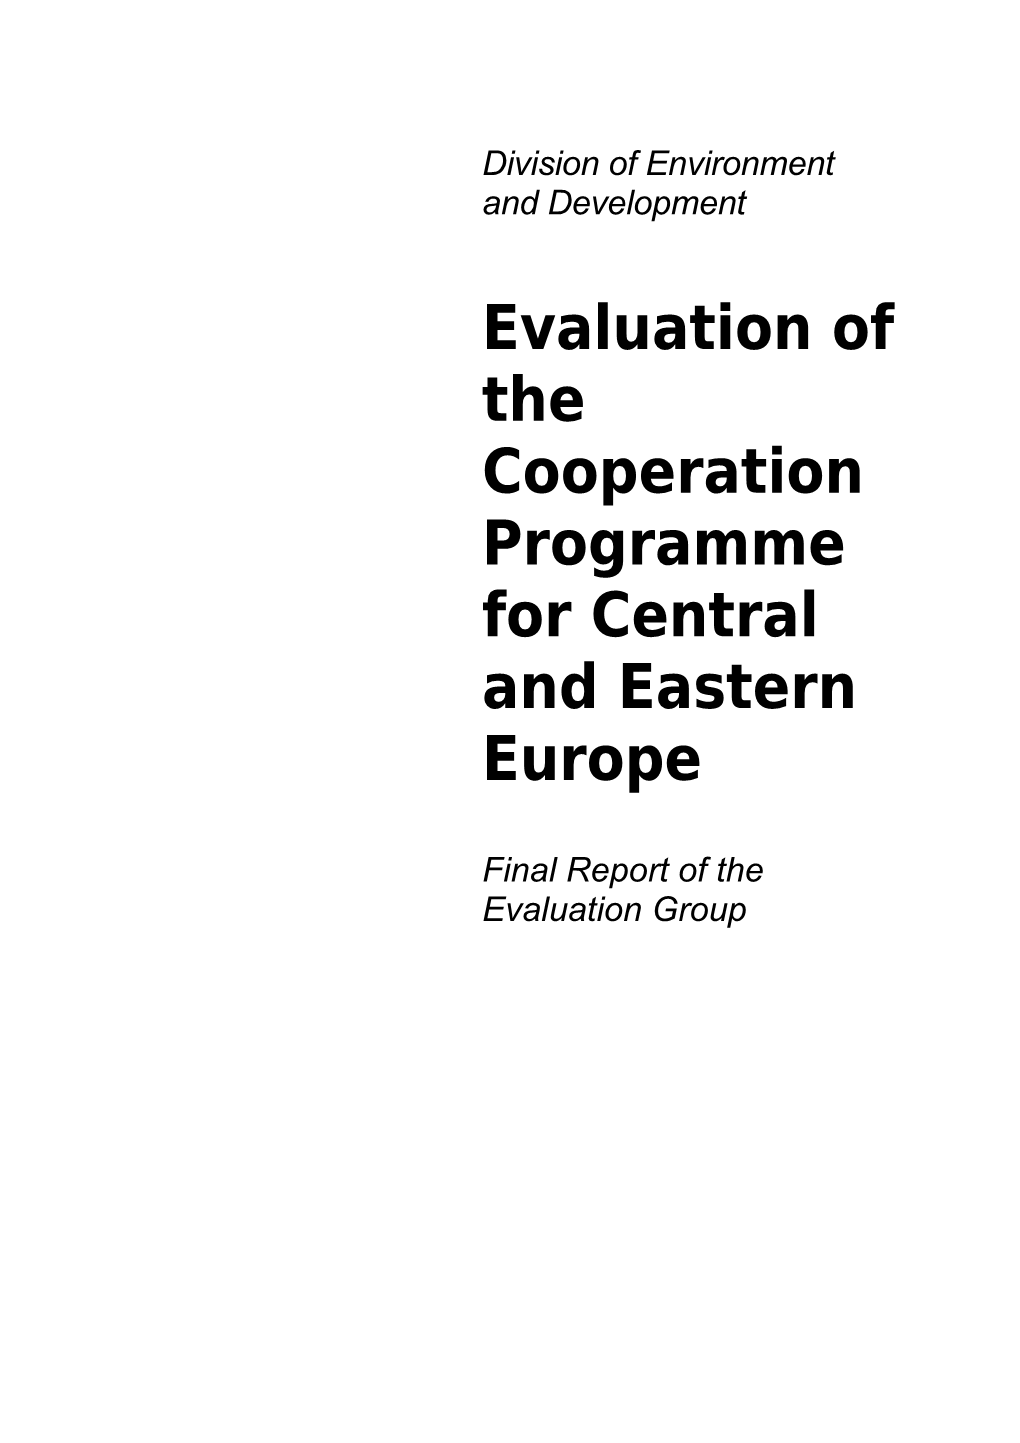 Evaluation of the Cooperation Program for Central and Eastern Europe